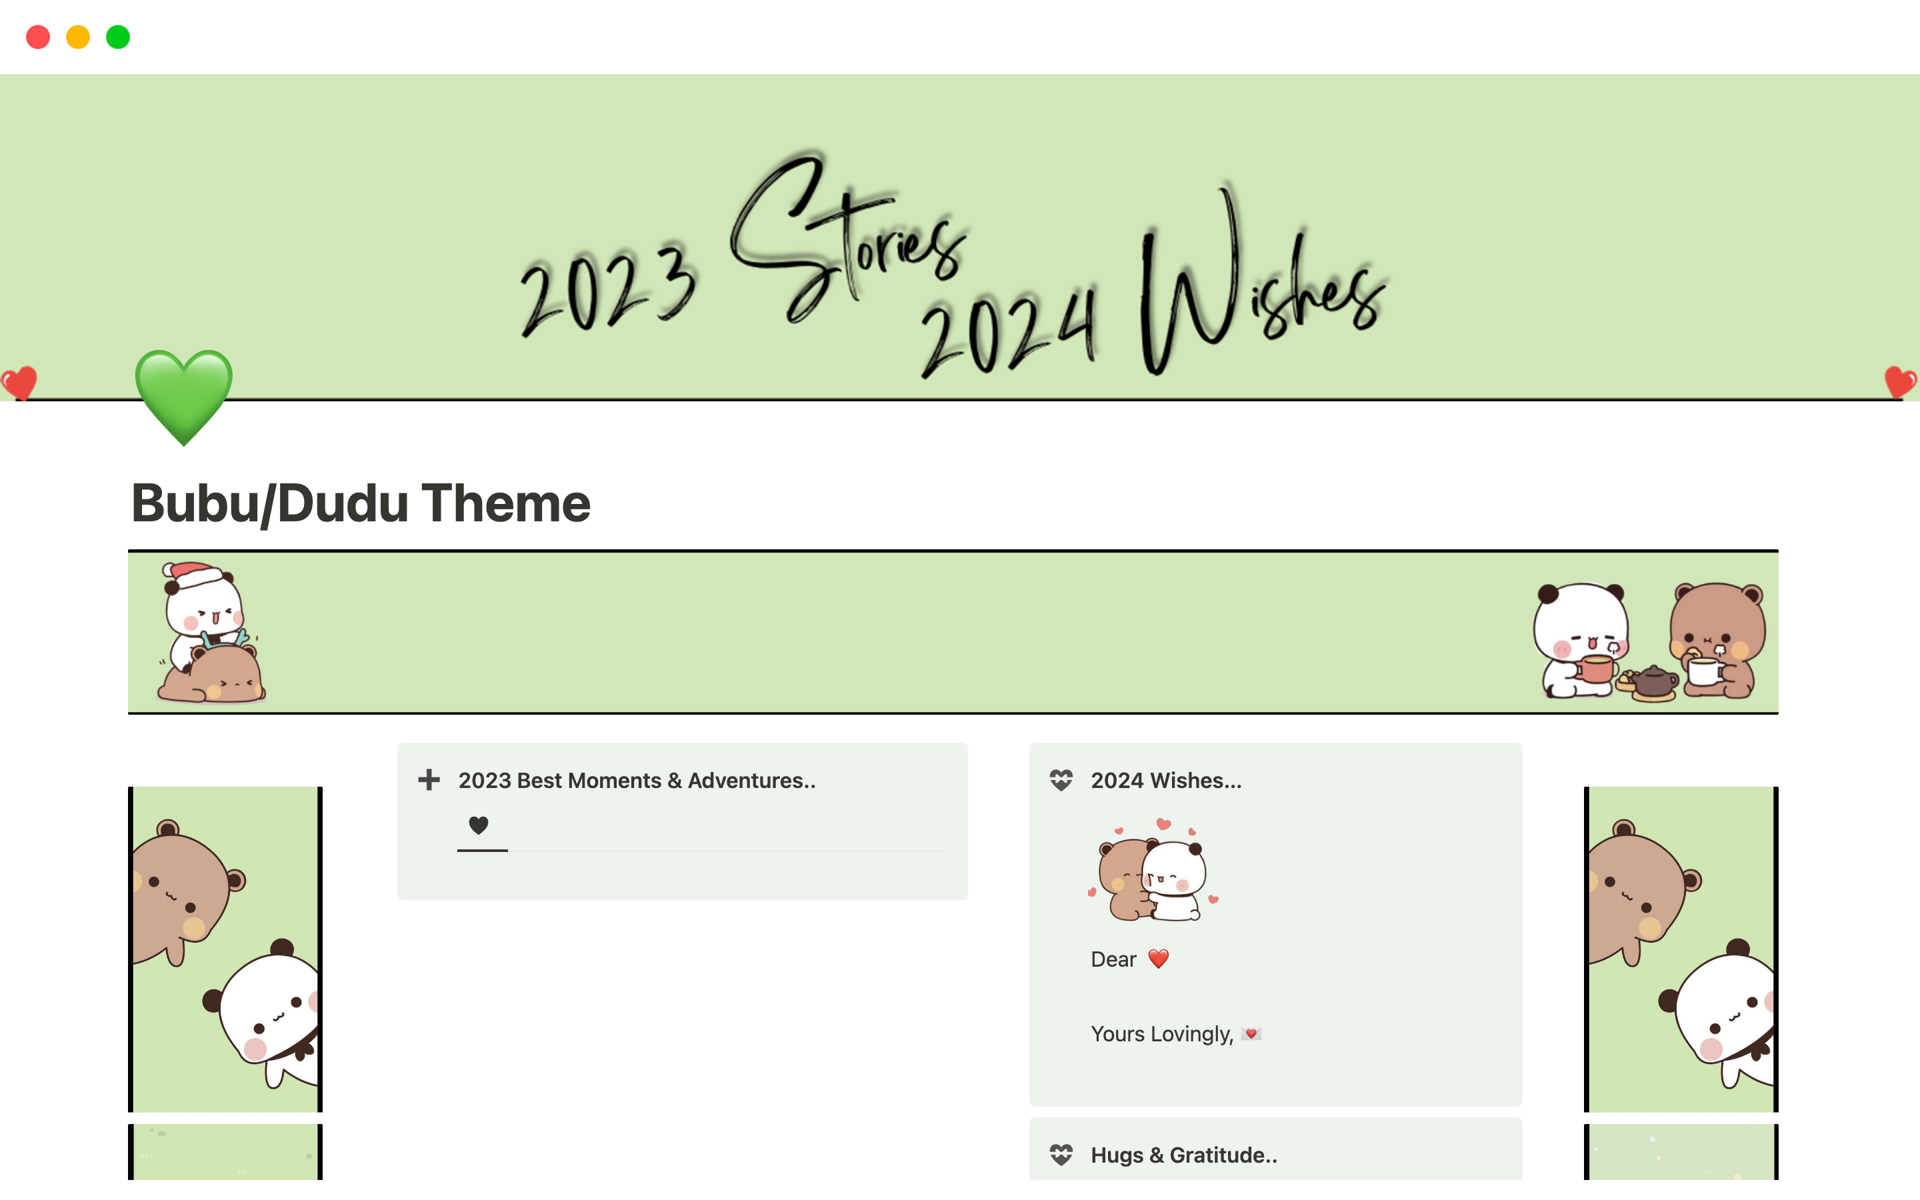 Customisable notion template to send New year wishes and Gratitude to your friends, family and loved ones.